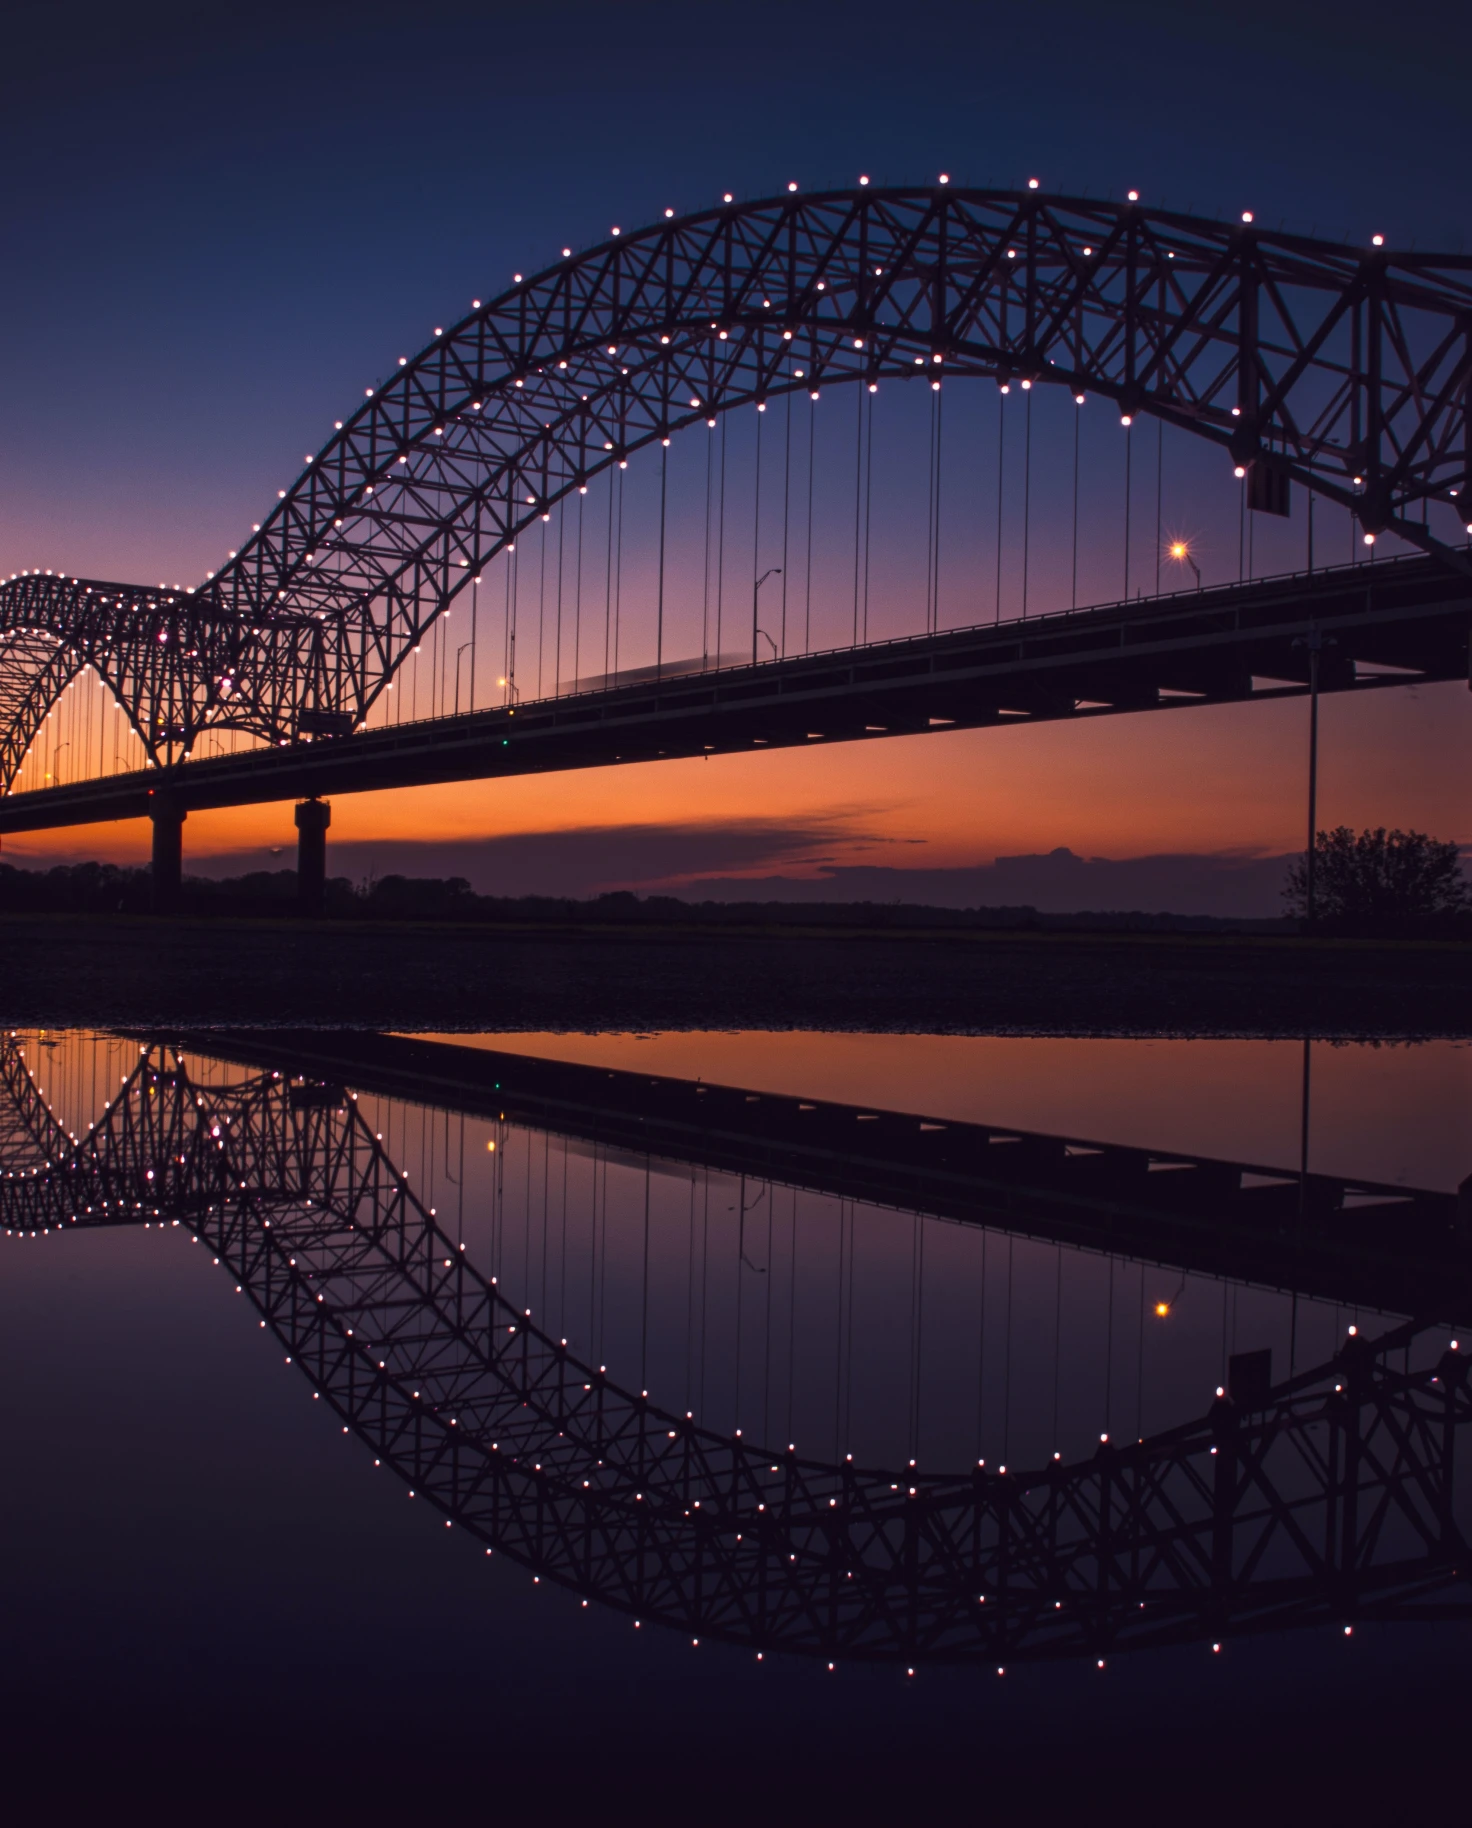 Bridge in Memphis Tennessee with orange sunset in the sky